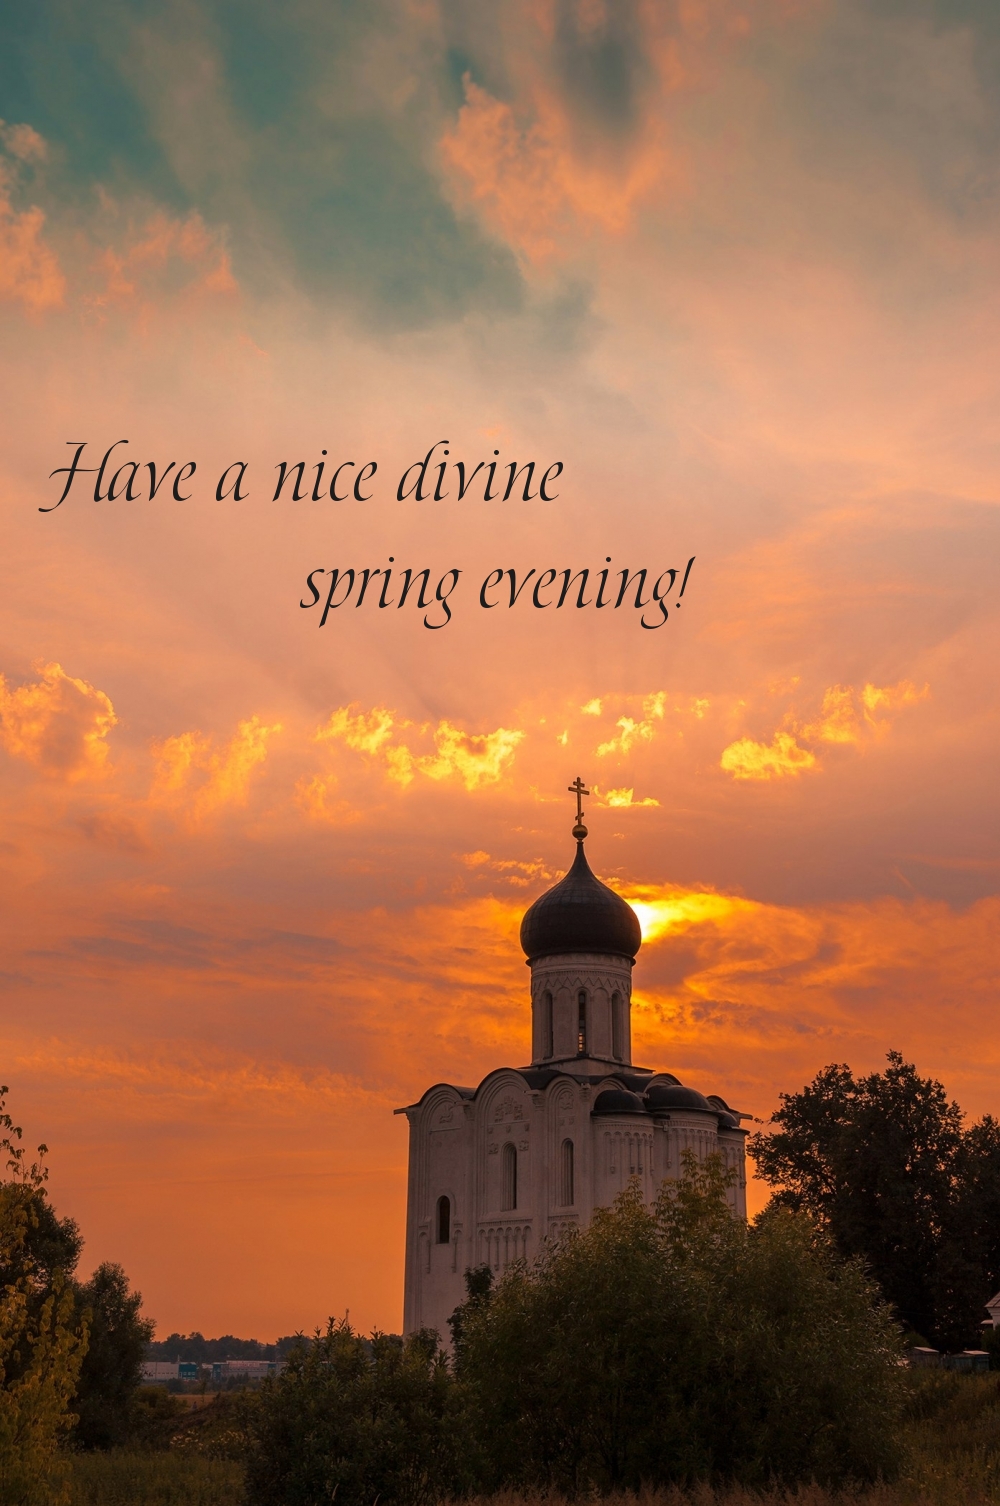 Have a nice divine spring evening!